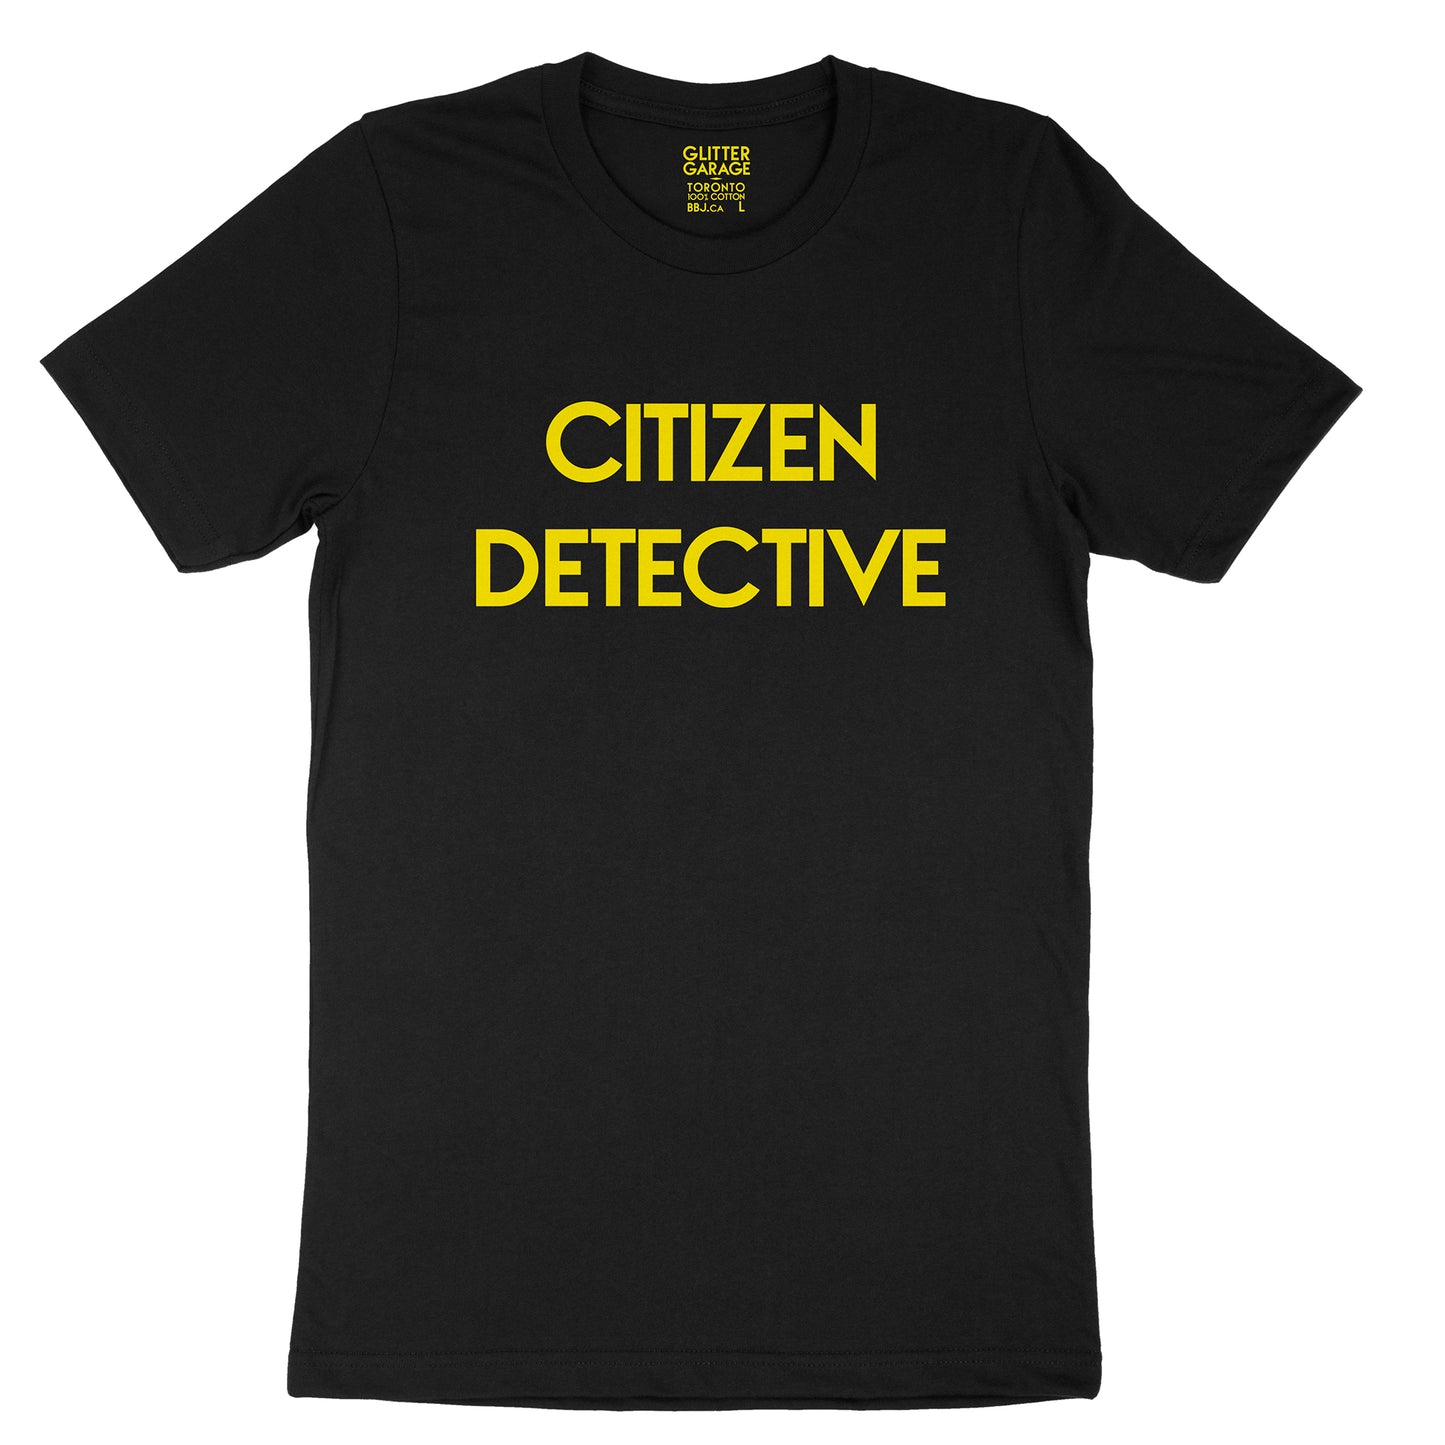 Custom text tee - Citizen Detective - yellow - USE YOUR WORDS black unisex t-shirt by BBJ / Glitter Garage